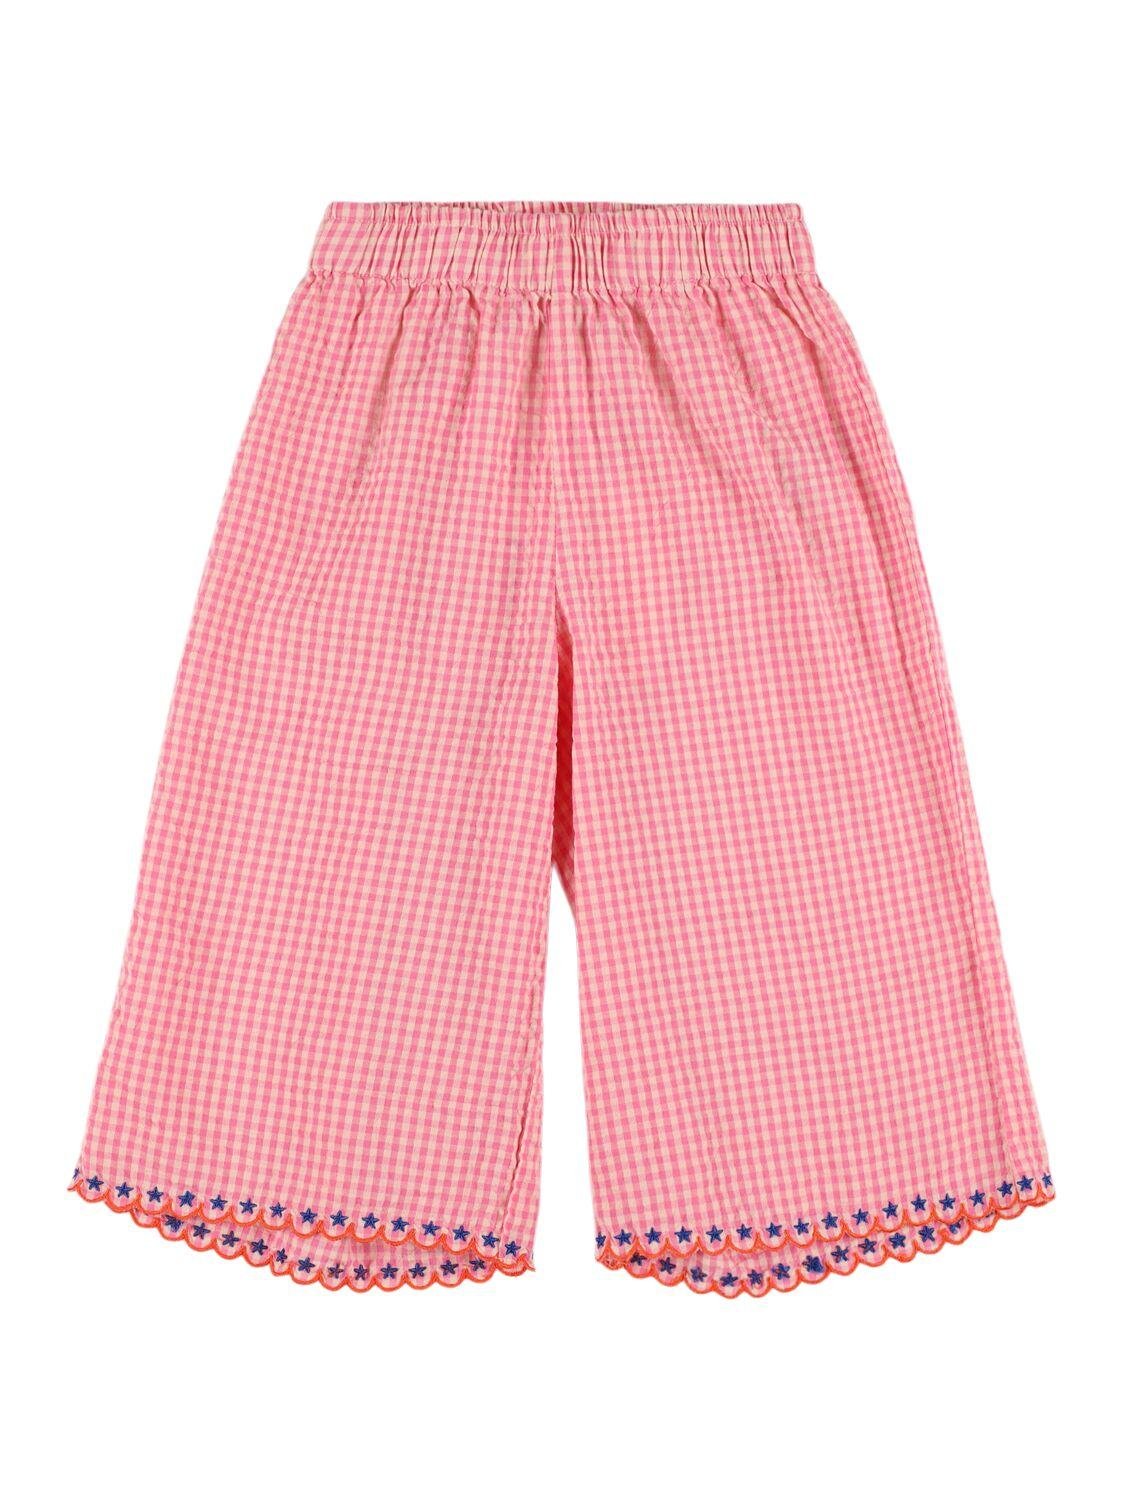 Cotton Gingham Pants by TINY COTTONS